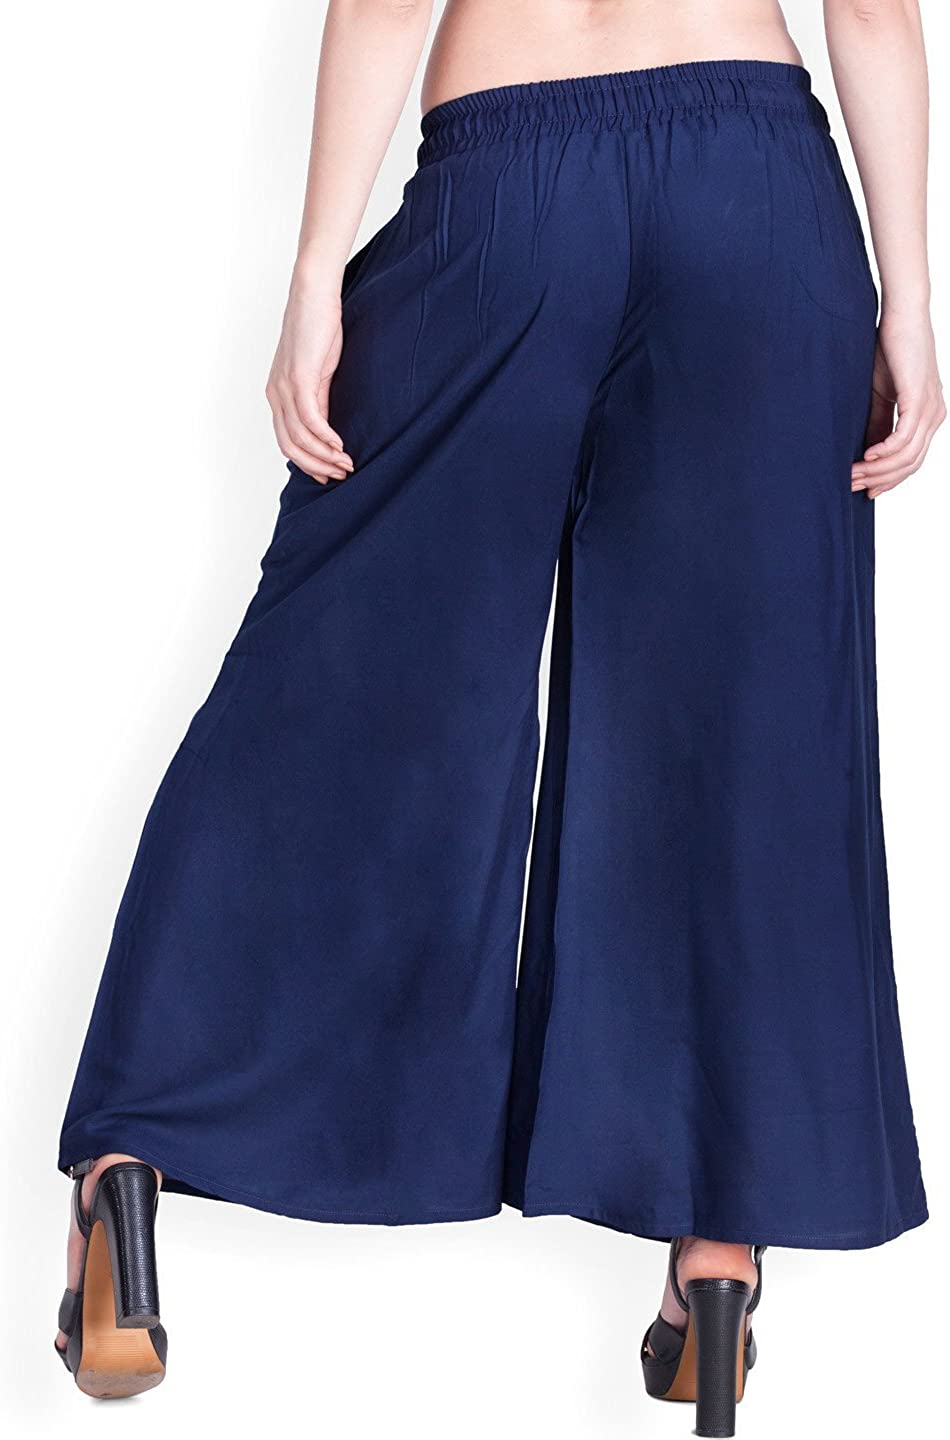 Buy Palazzo Pants with Pockets for Women  Many Colors and Prints  High  Waisted Wide Legged  Solid Navy  One Size  715854664505 at Amazonin